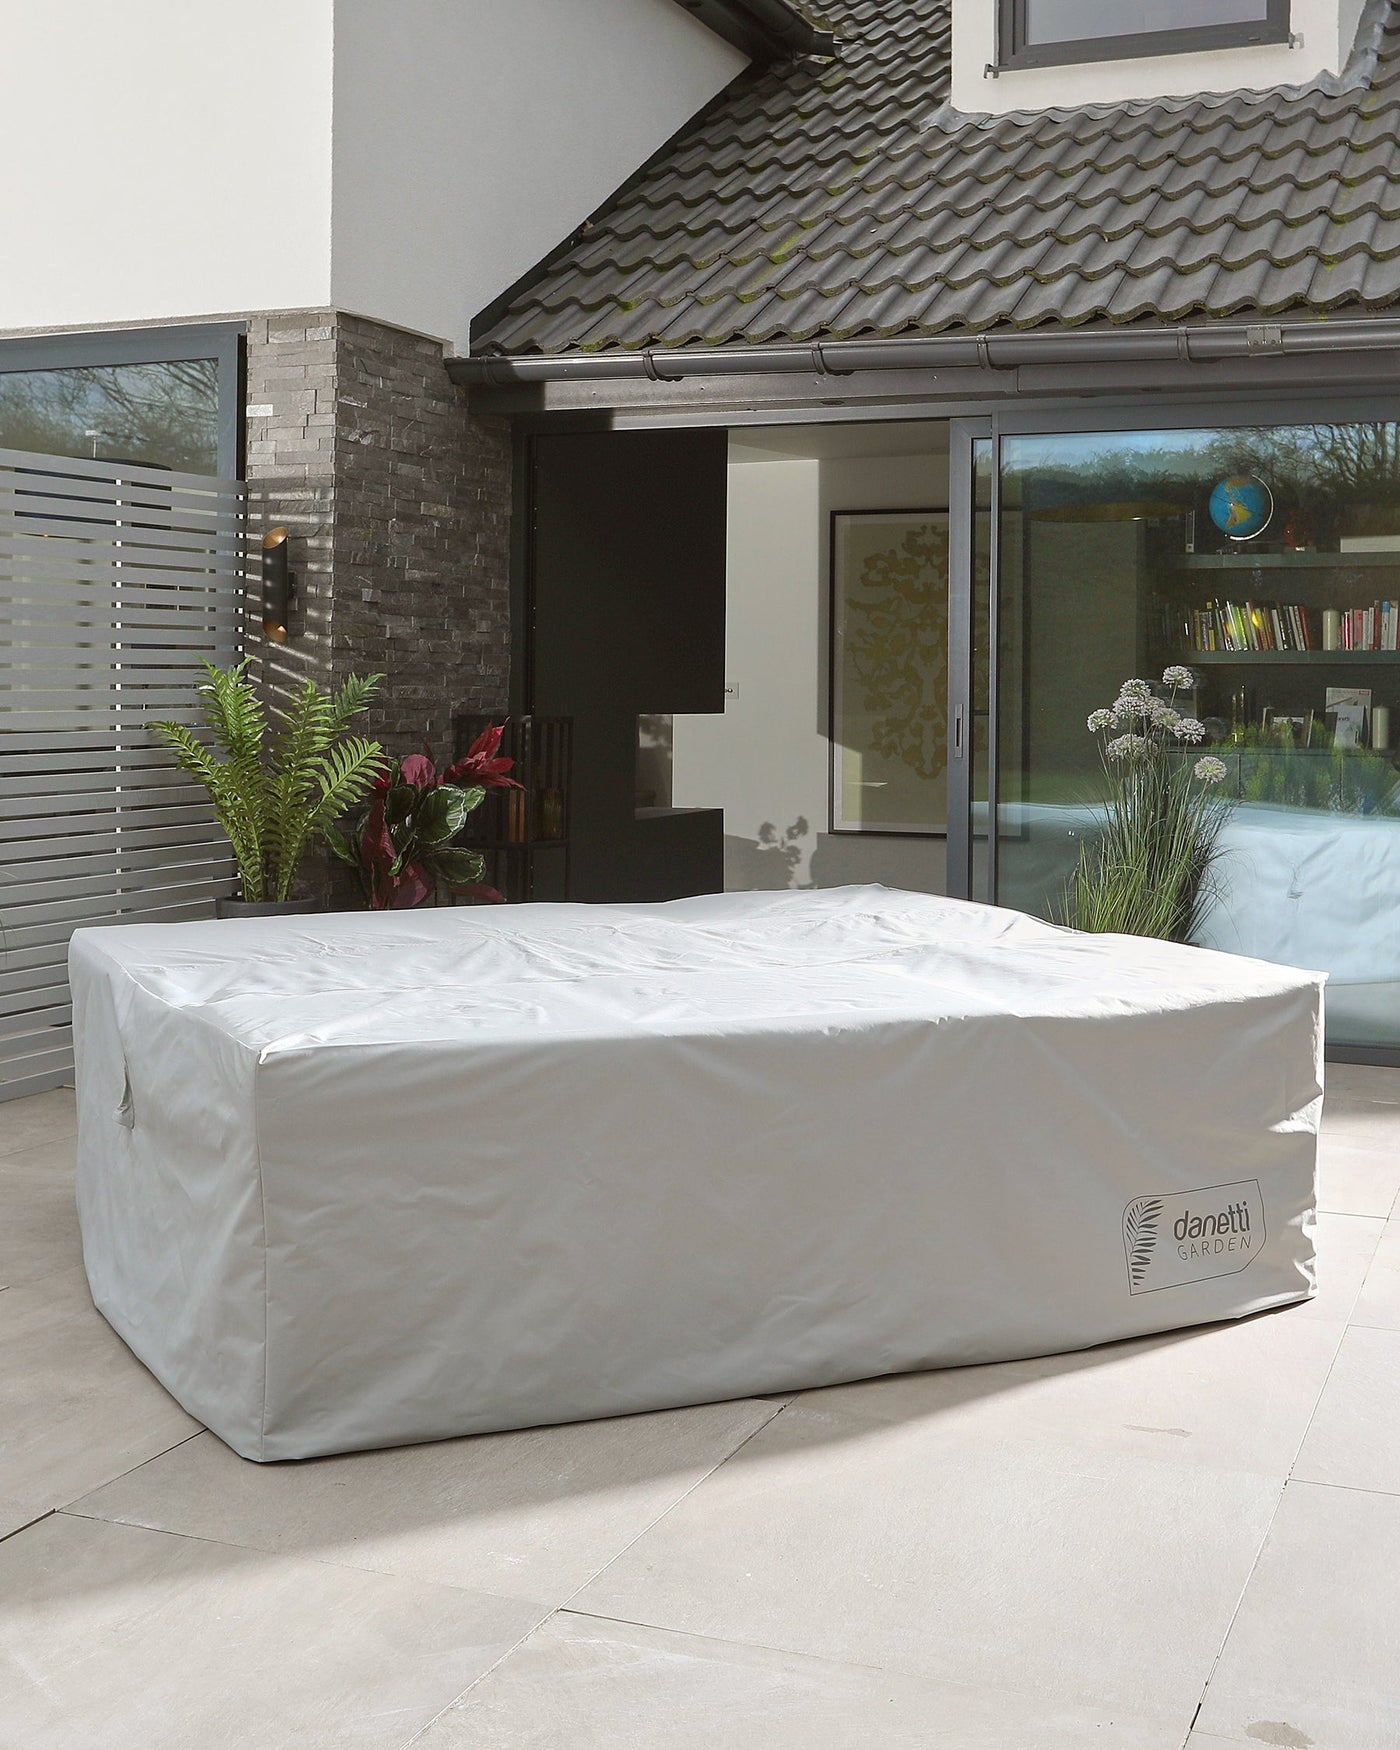 Outdoor furniture piece protected under a white waterproof cover, featuring a logo on the side, situated on a patio area near an open sliding door.